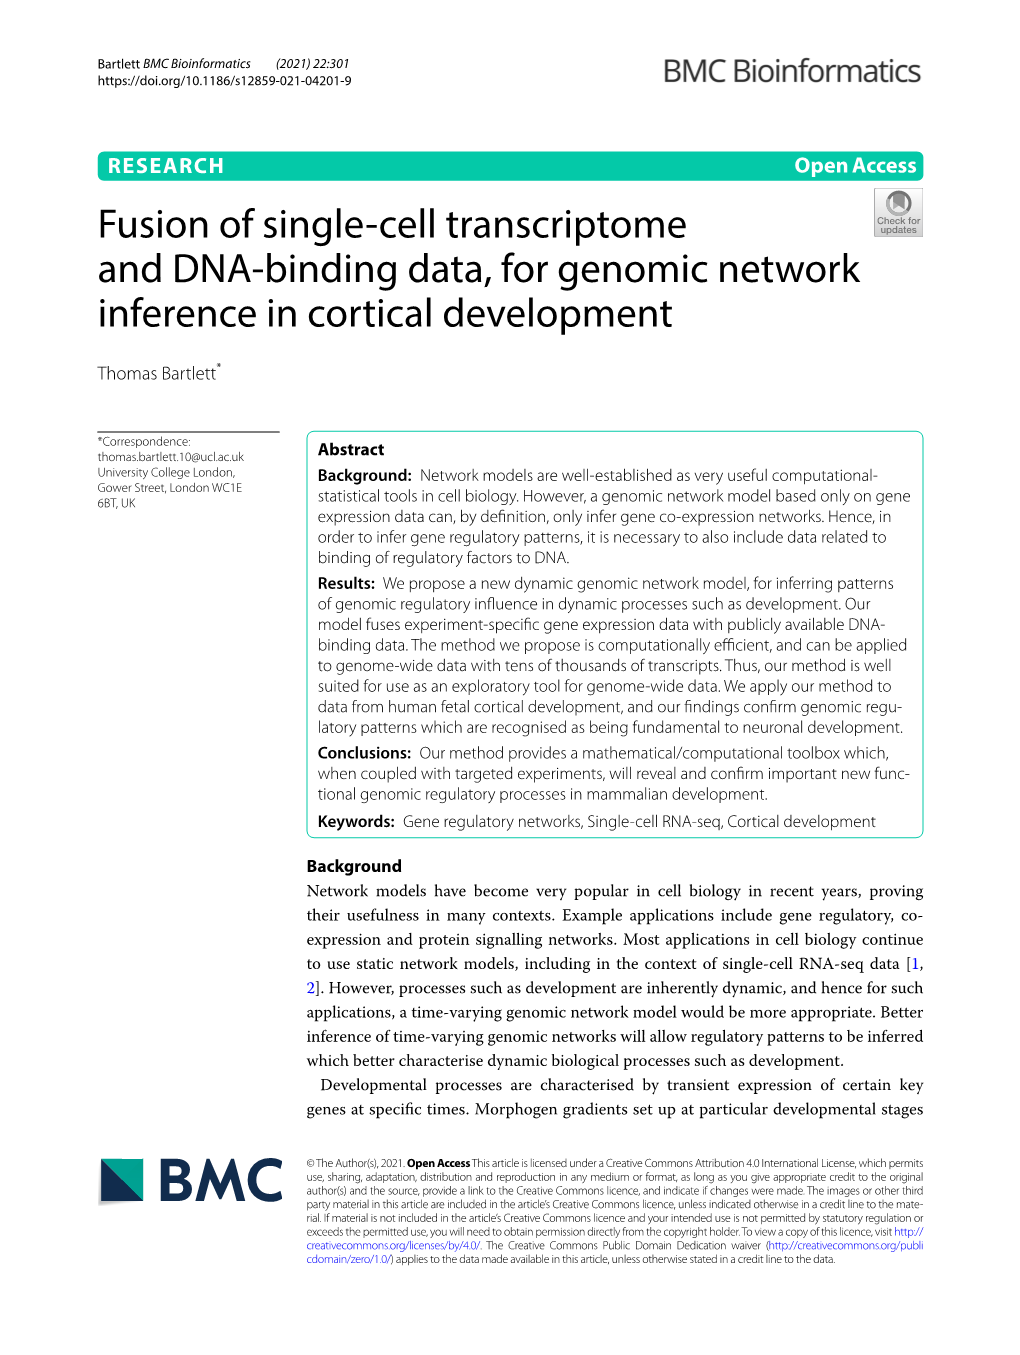 Fusion of Single-Cell Transcriptome and DNA